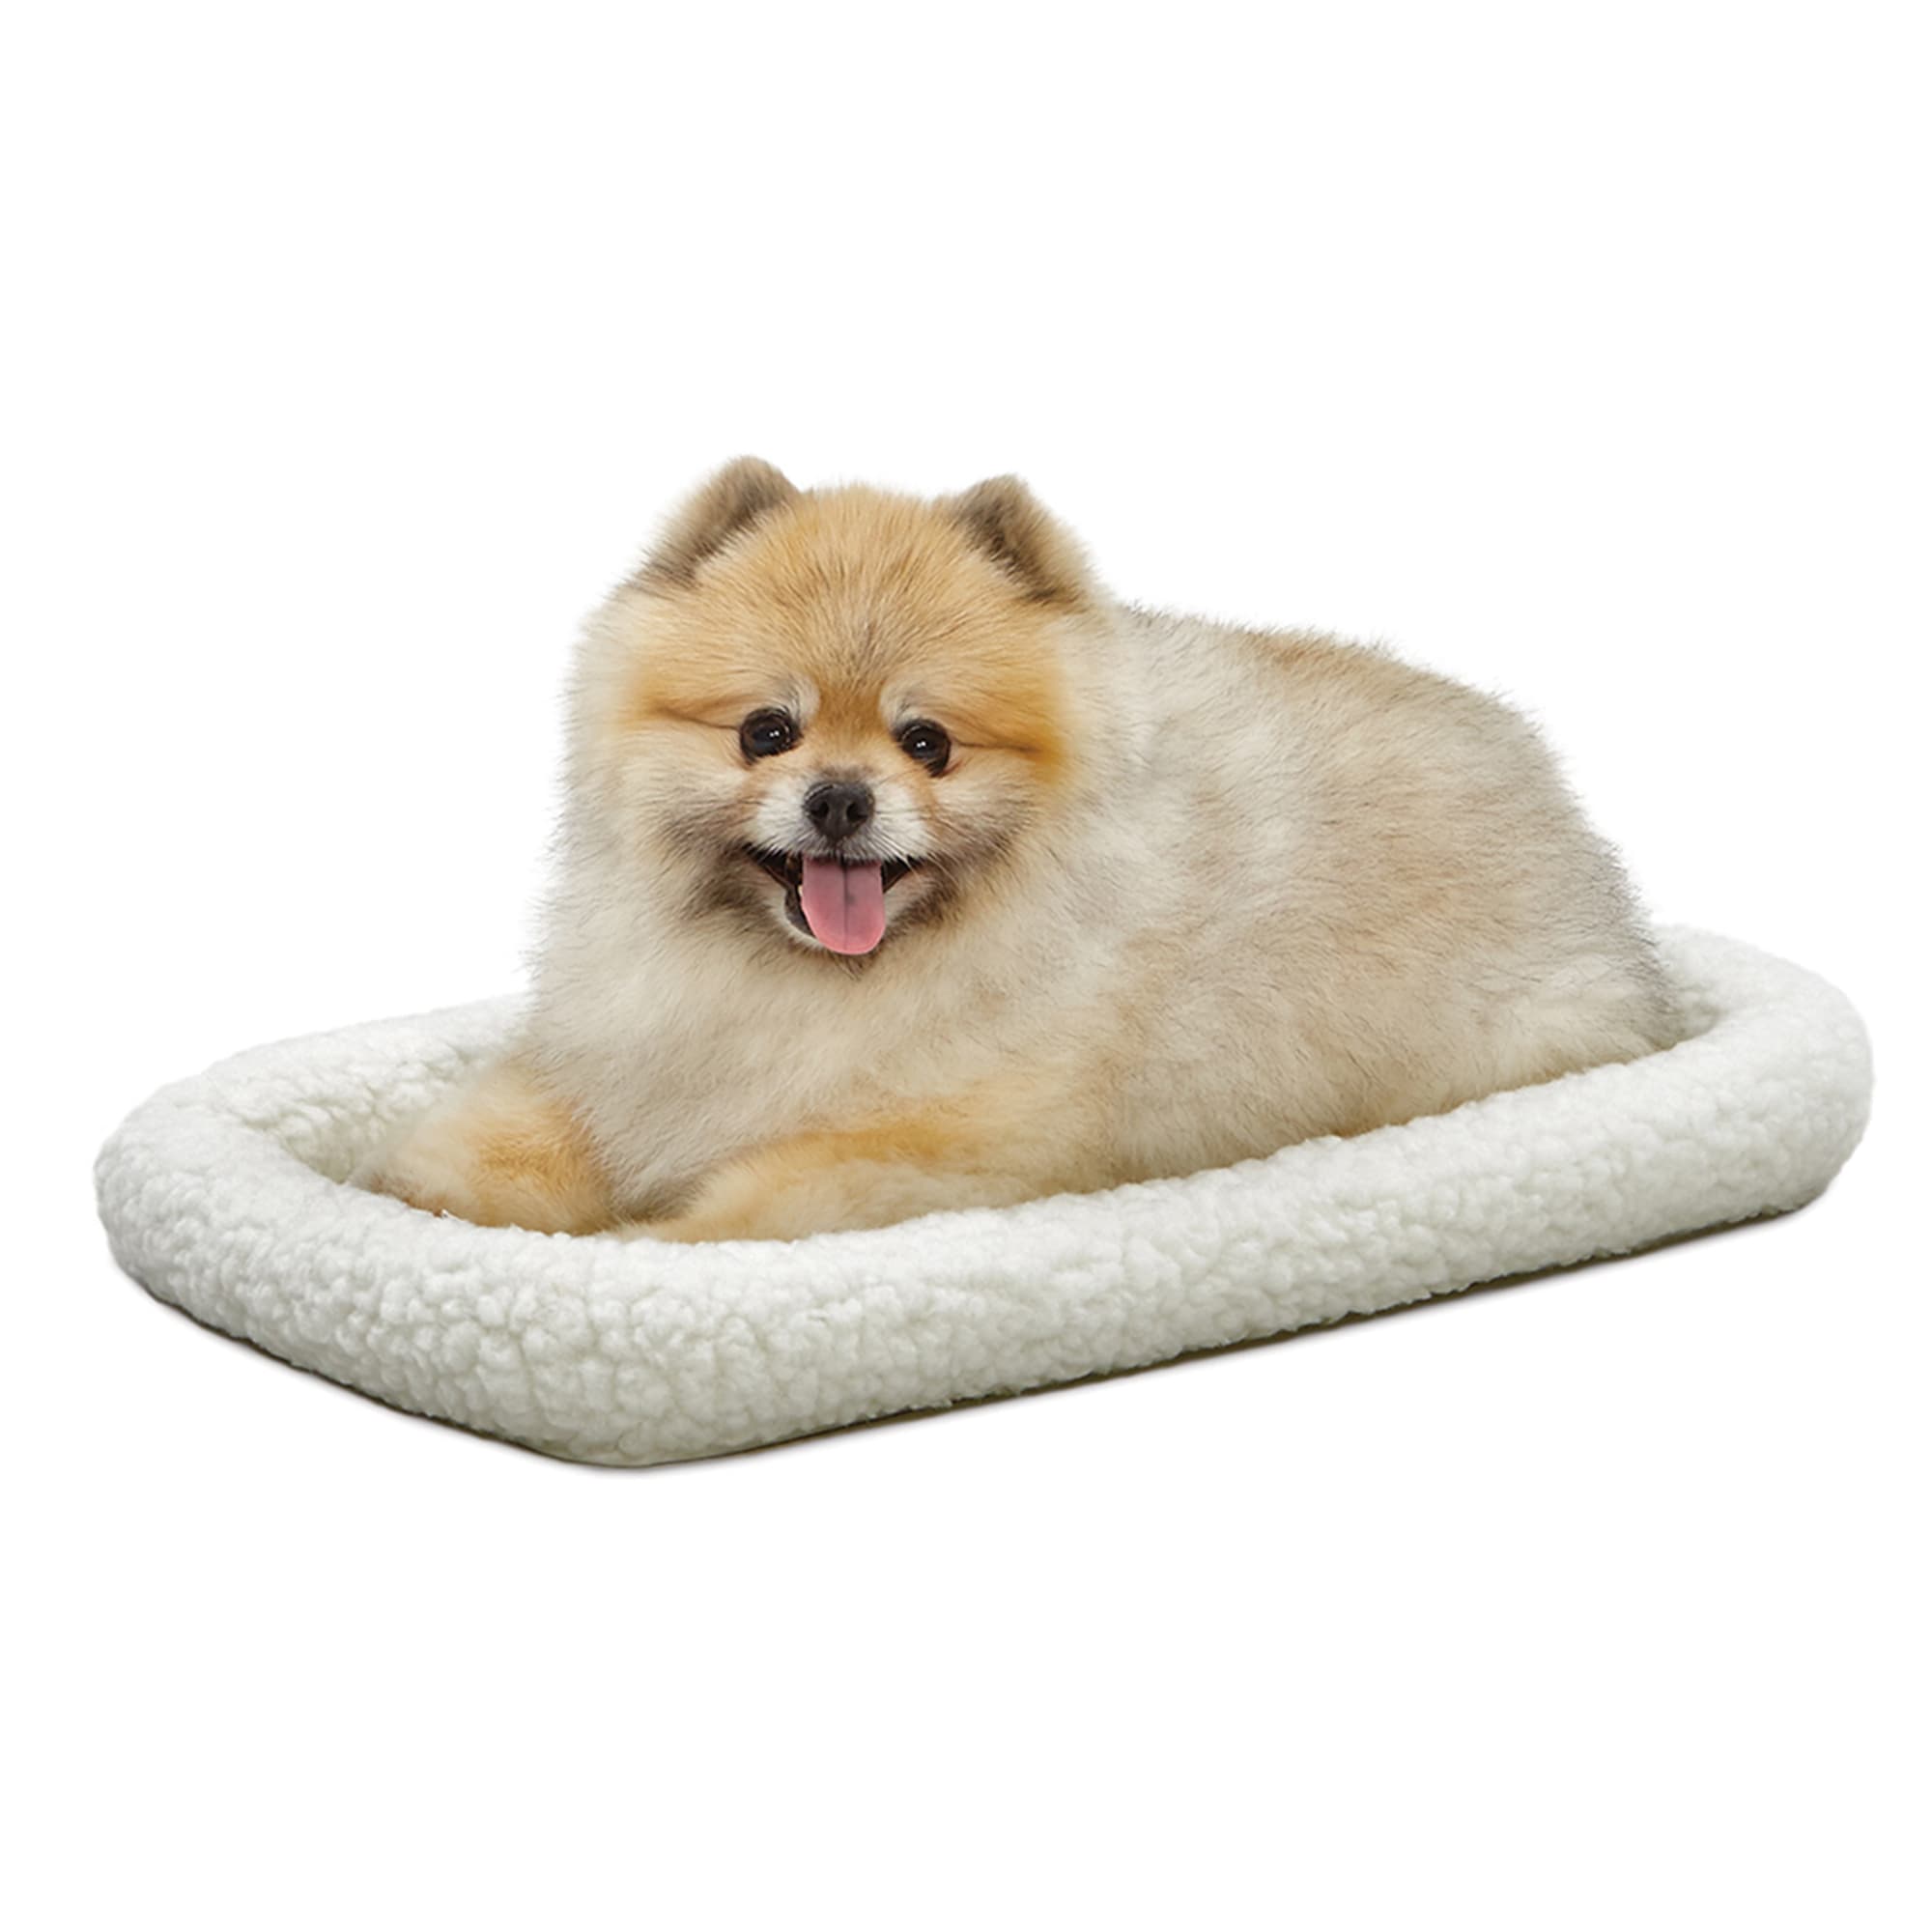 Photos - Dog Bed / Basket Midwest Quiet Time Bolster White Dog Bed, 22" L X 13" W, X-Small, 